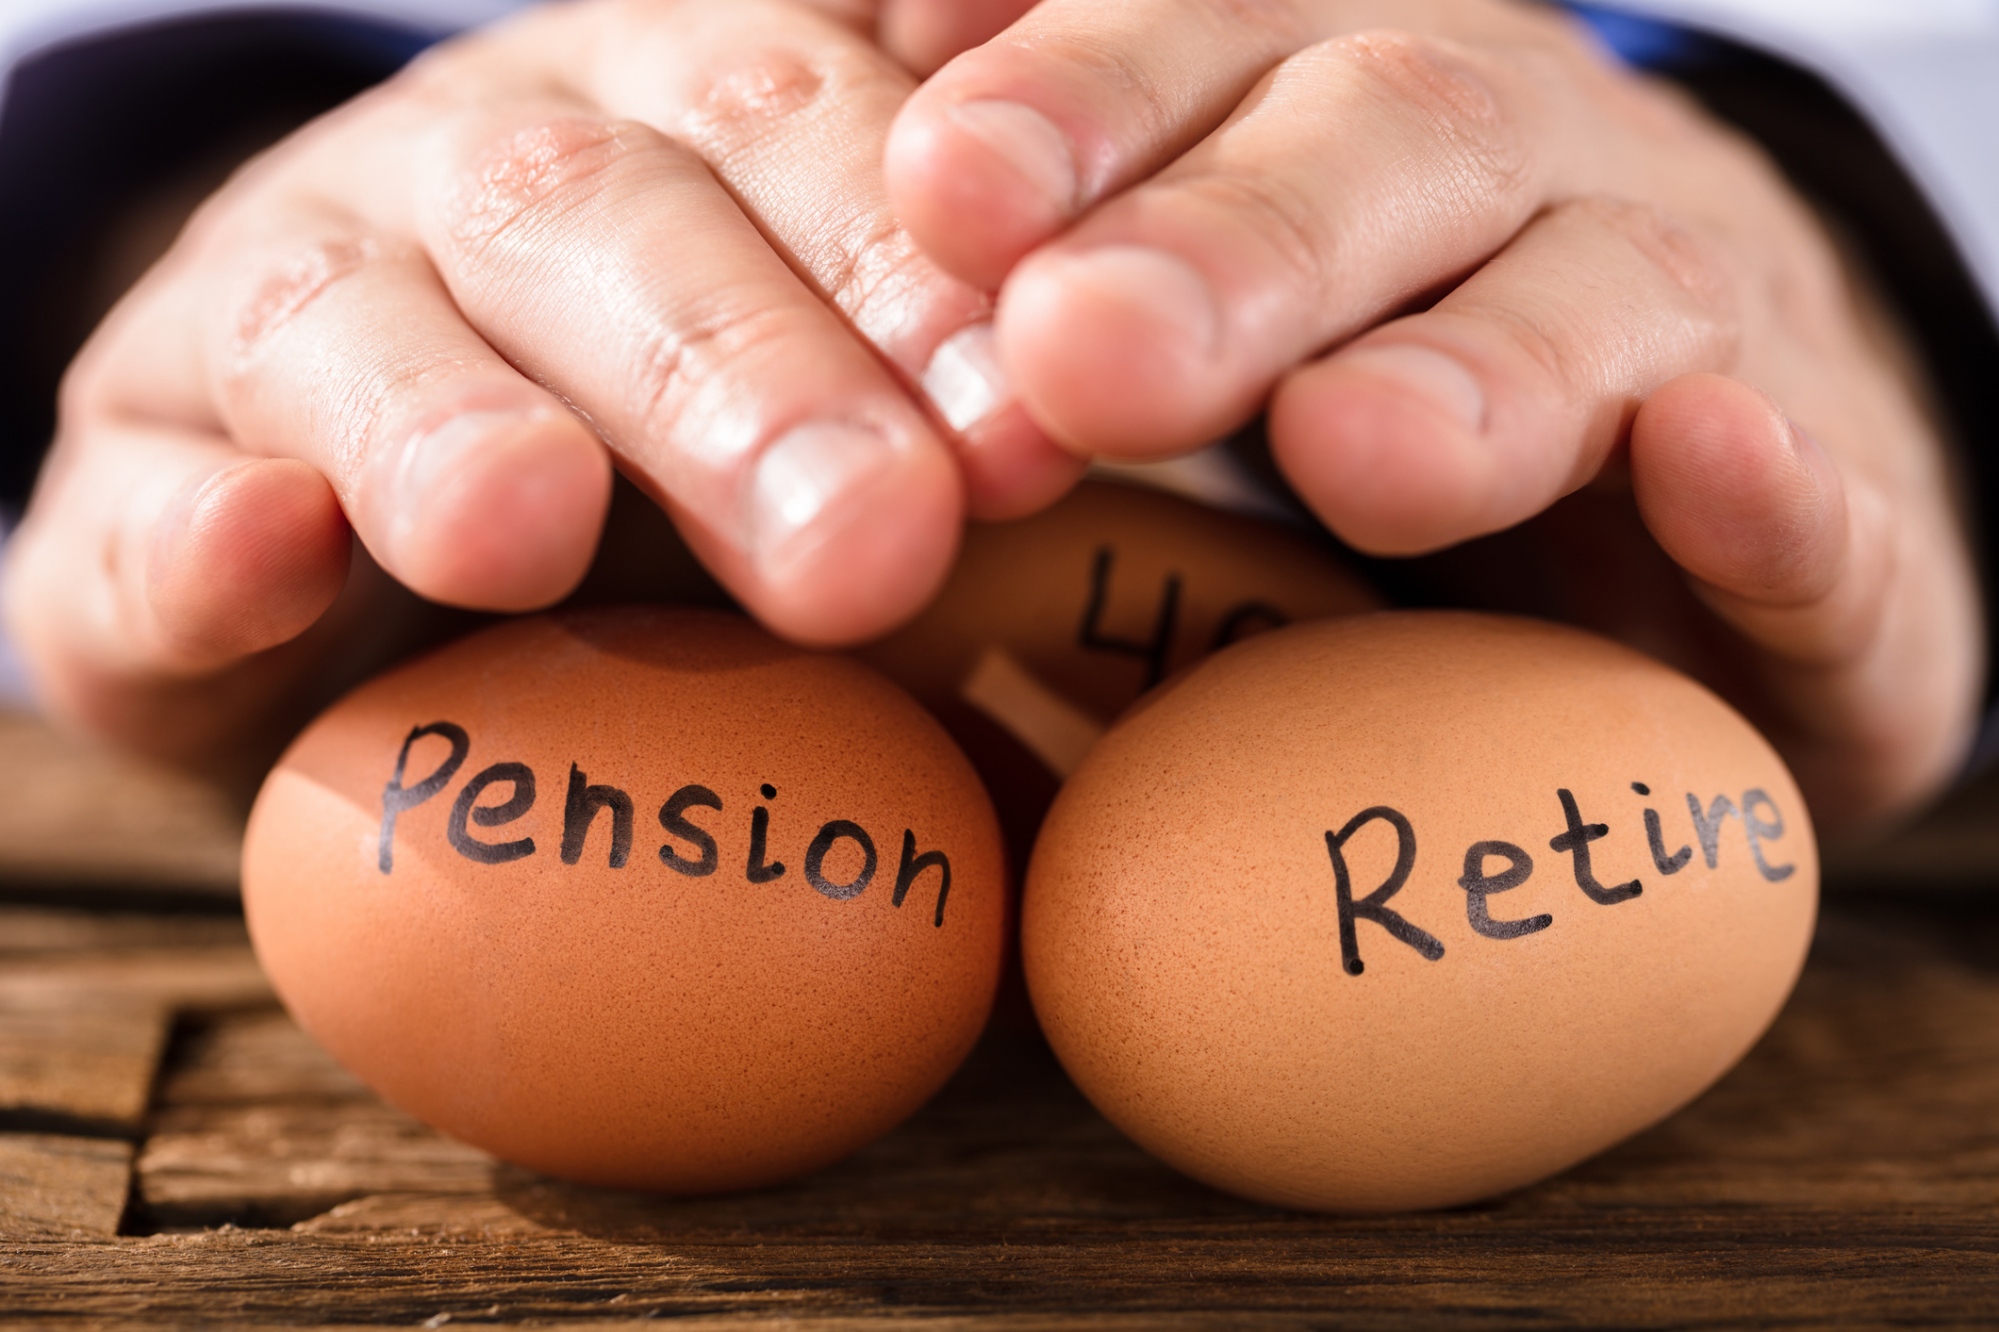 Protecting eggs that say pension and retire